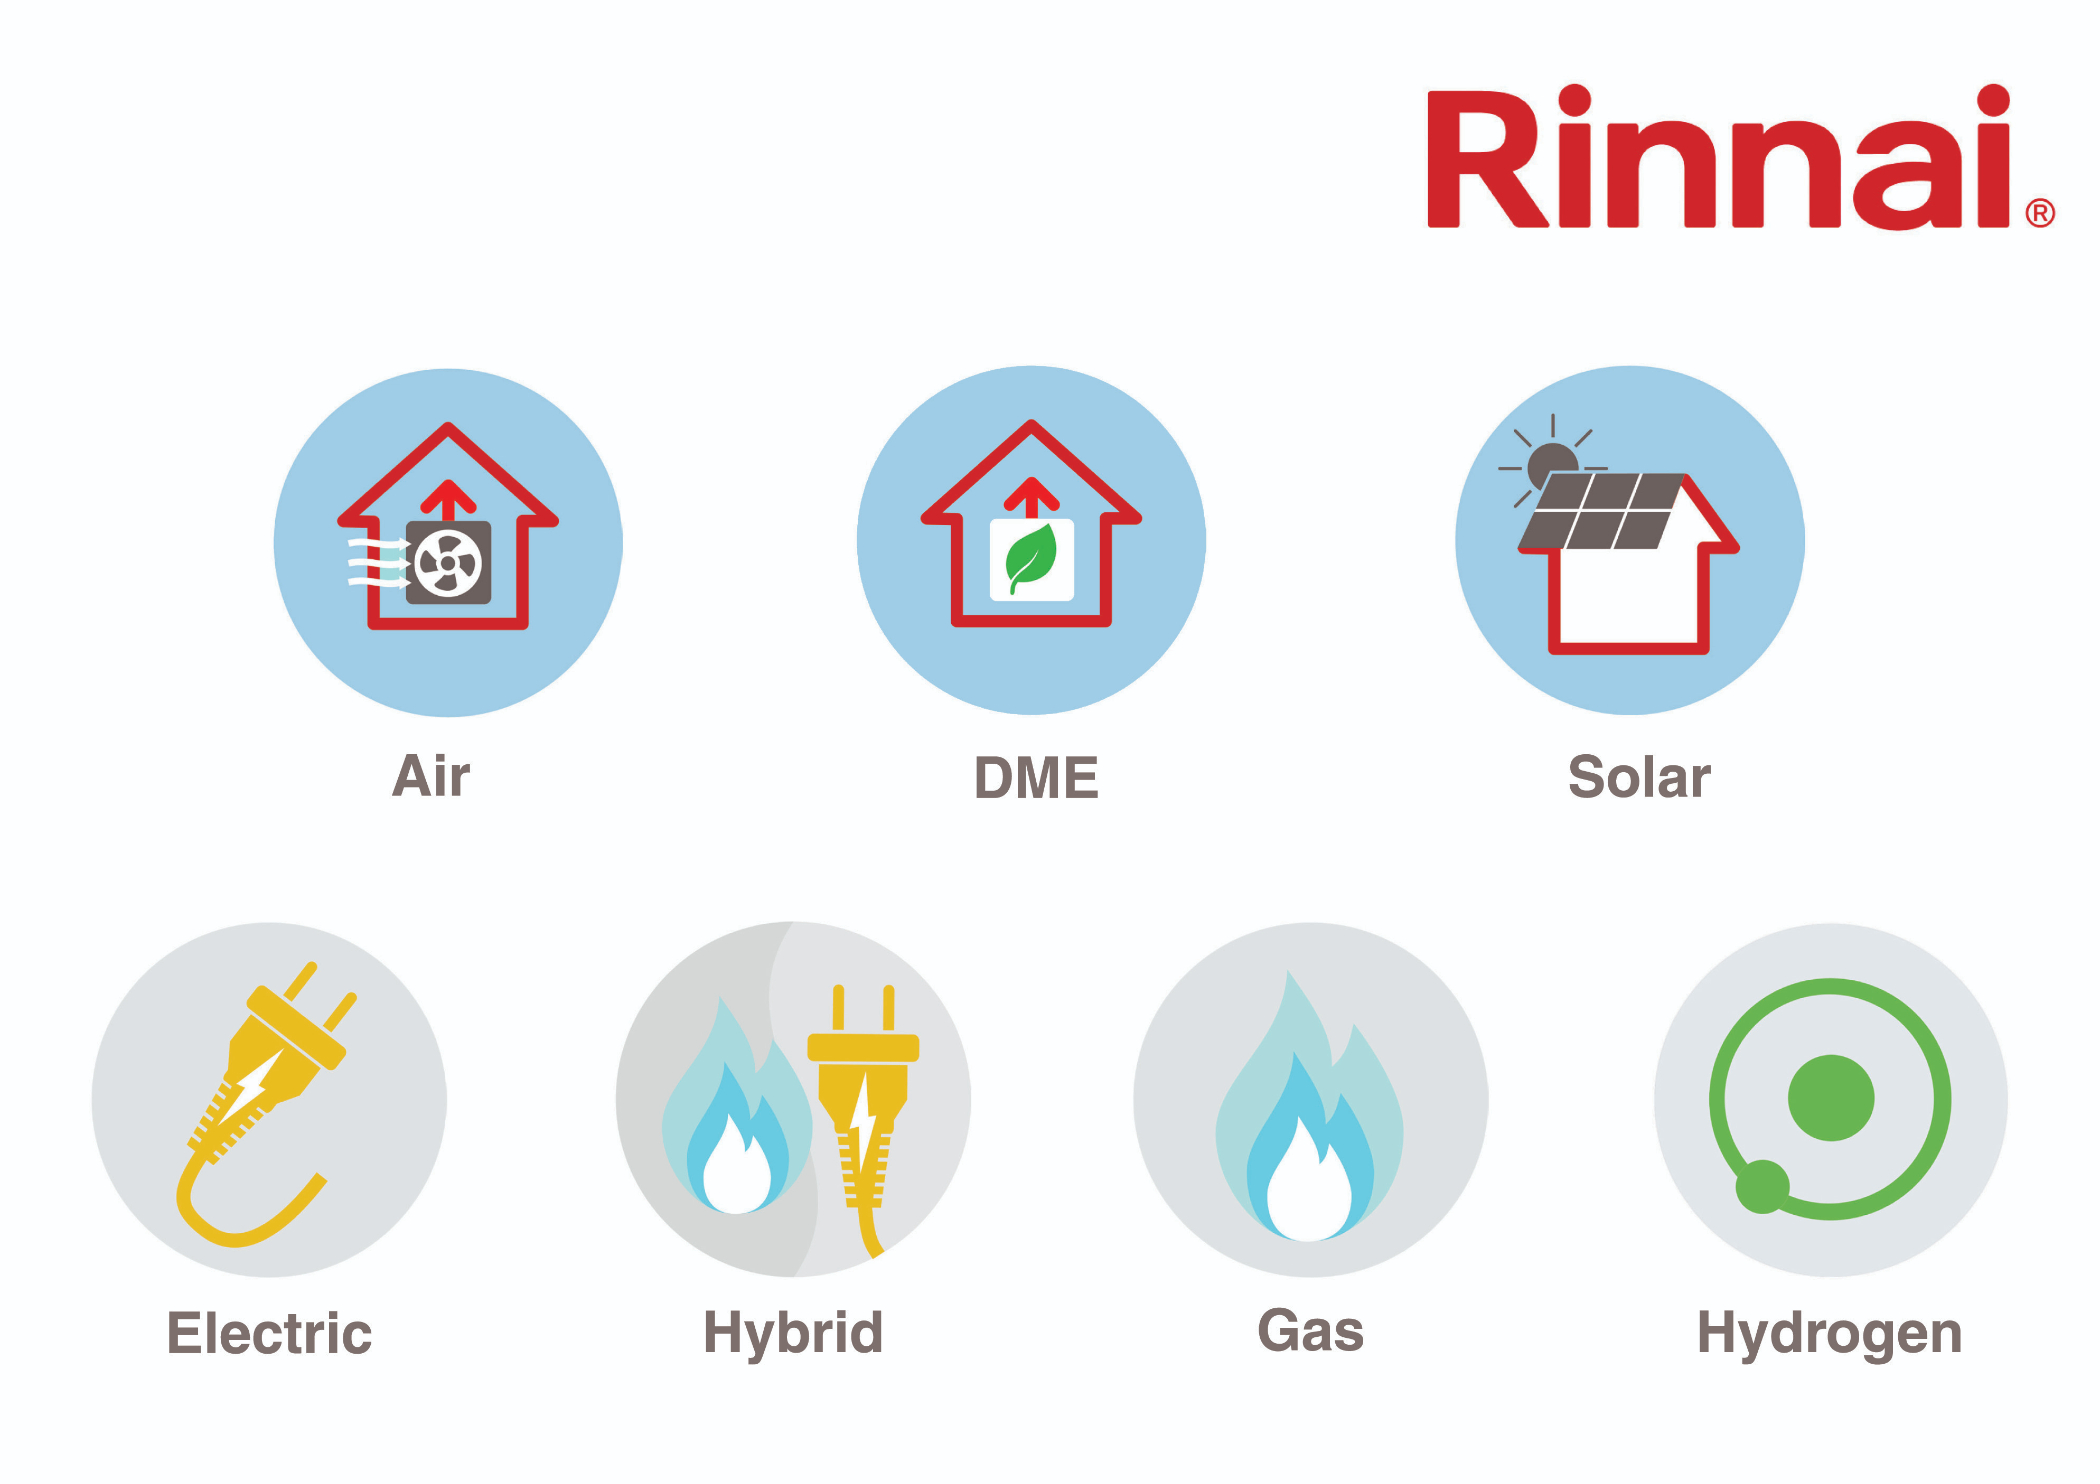 RINNAI - NEW PRODUCT LAUNCH PROGRAMME OF LOW GWP HEAT PUMPS, ELECTRIC WATER HEATERS, HOT WATER CYLINDERS & PLATE HEAT EXCHANGERS